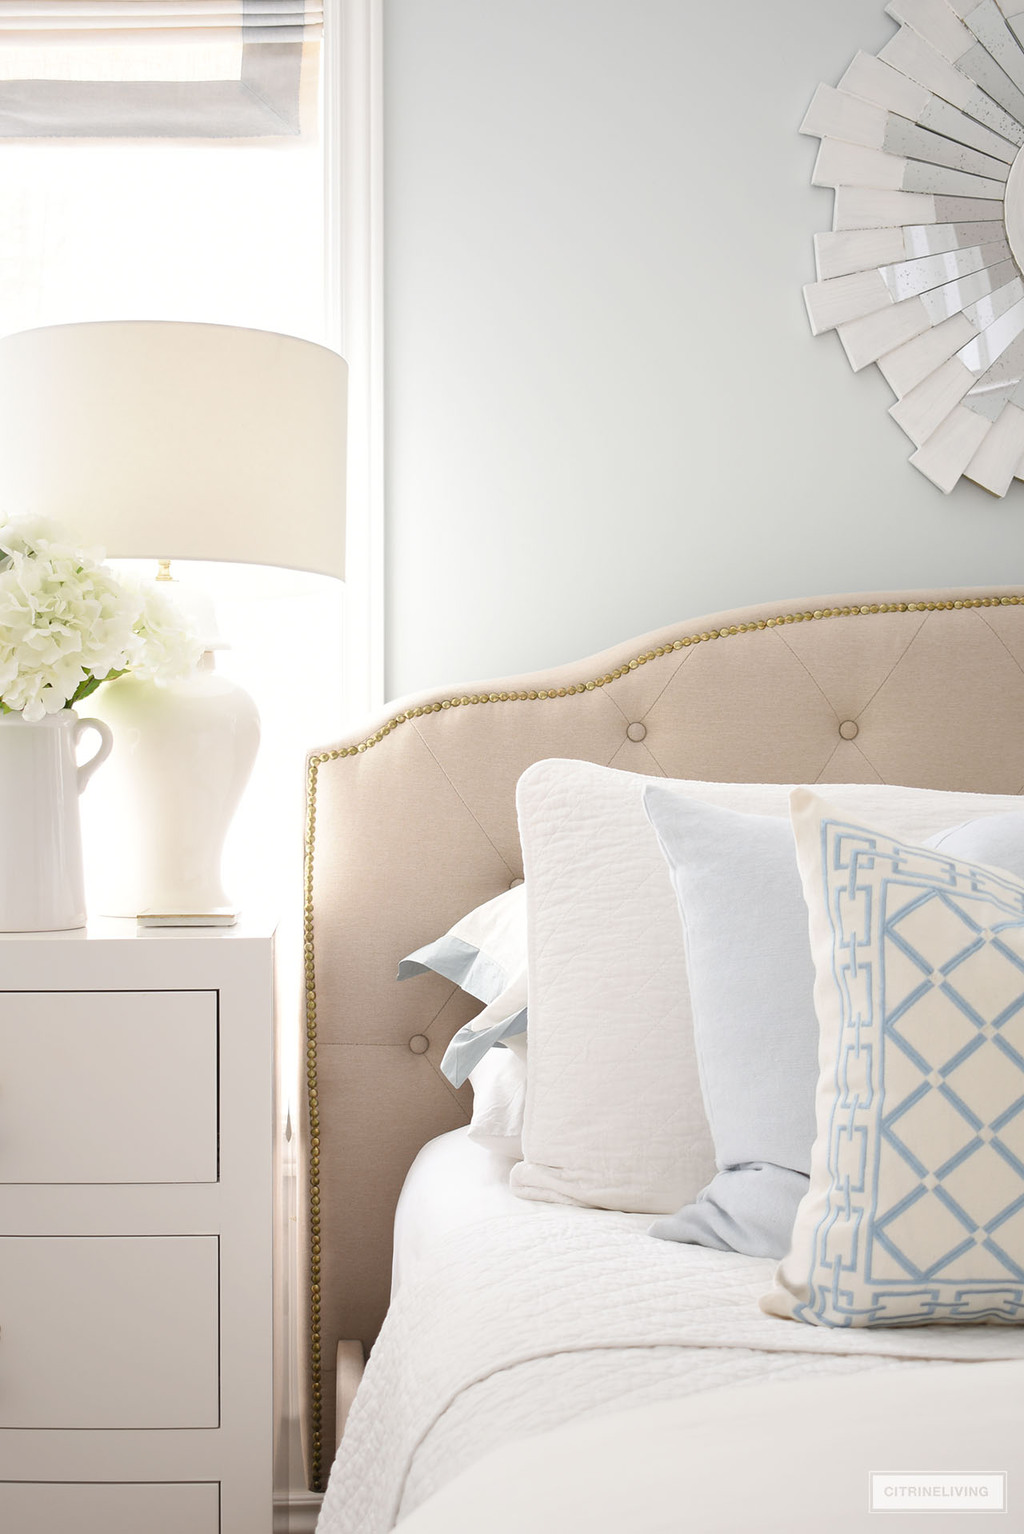 Beautiful layers of white and light blue bedding and pillows on an elegant upholstered bed with nailhead trim.